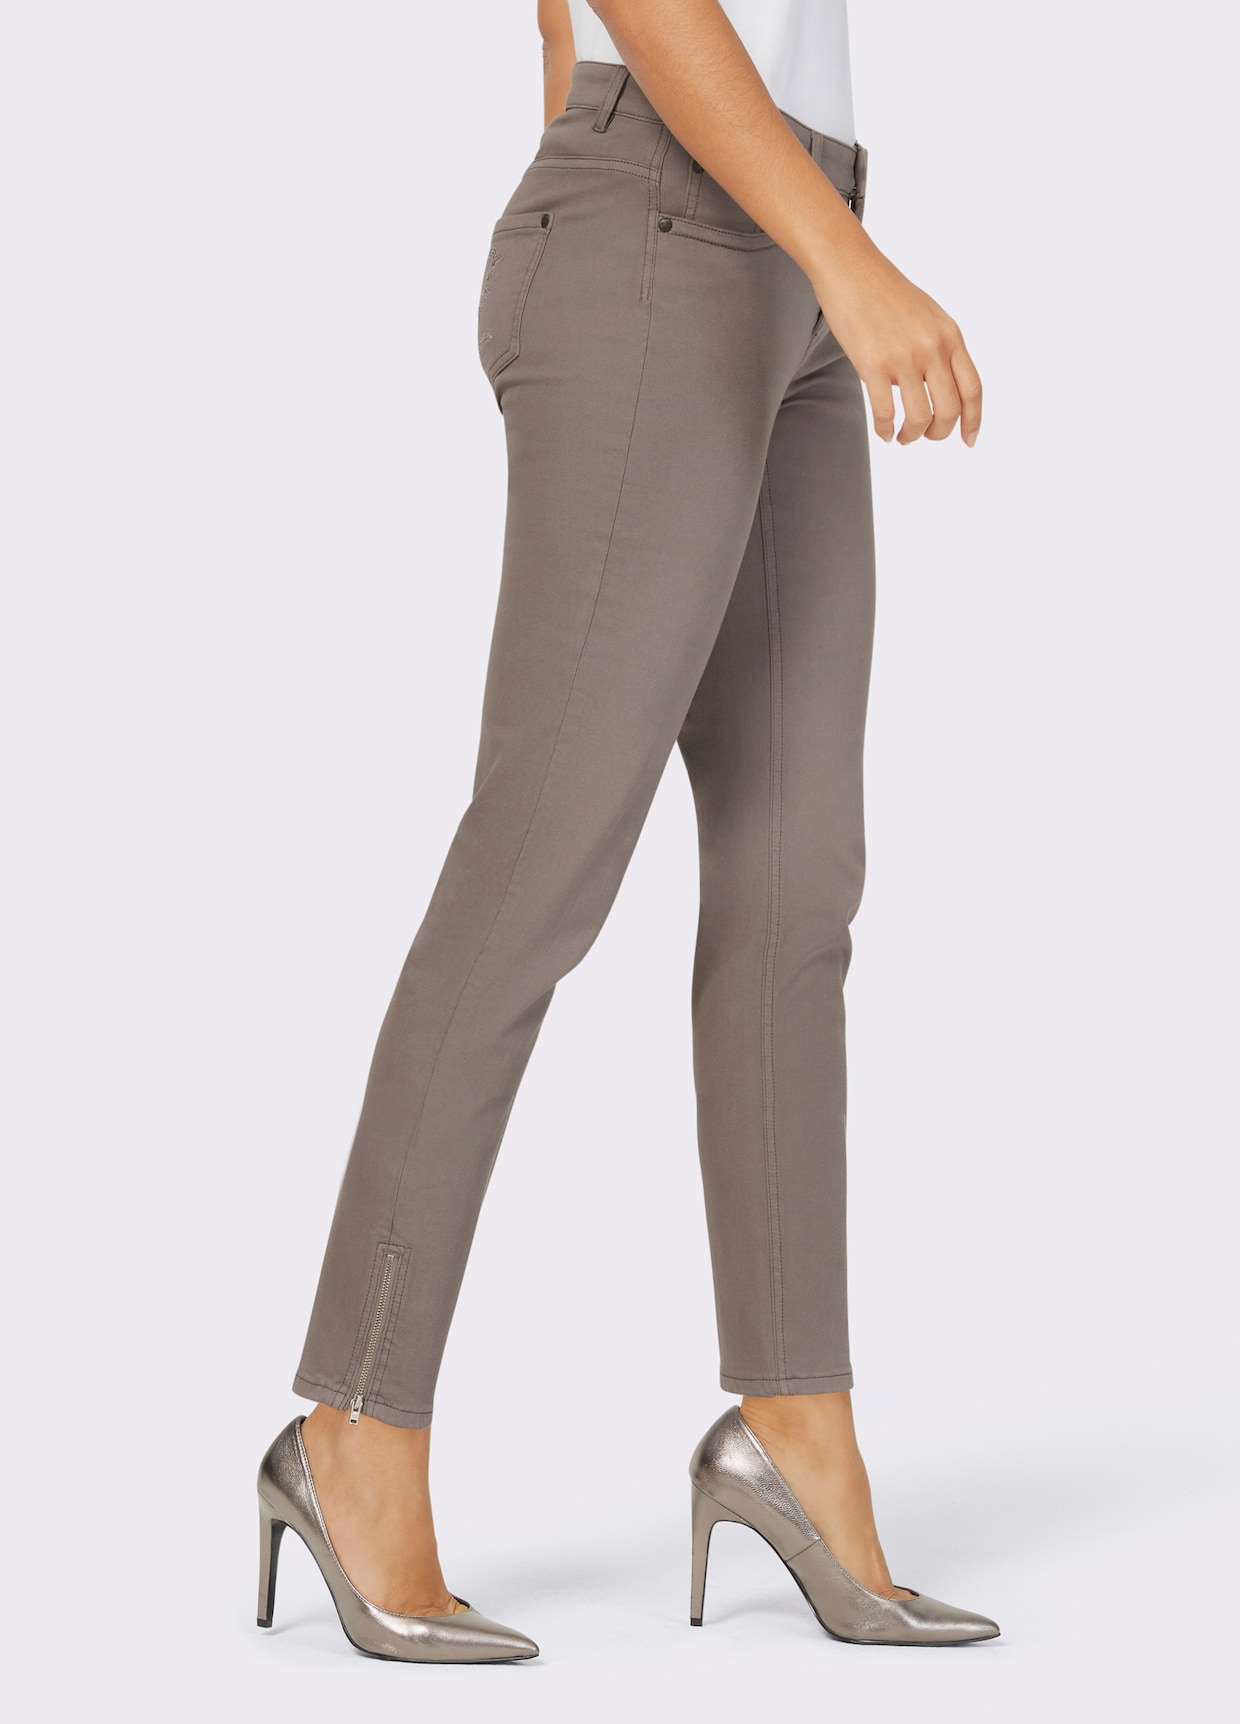 Ascari jeans - donkertaupe